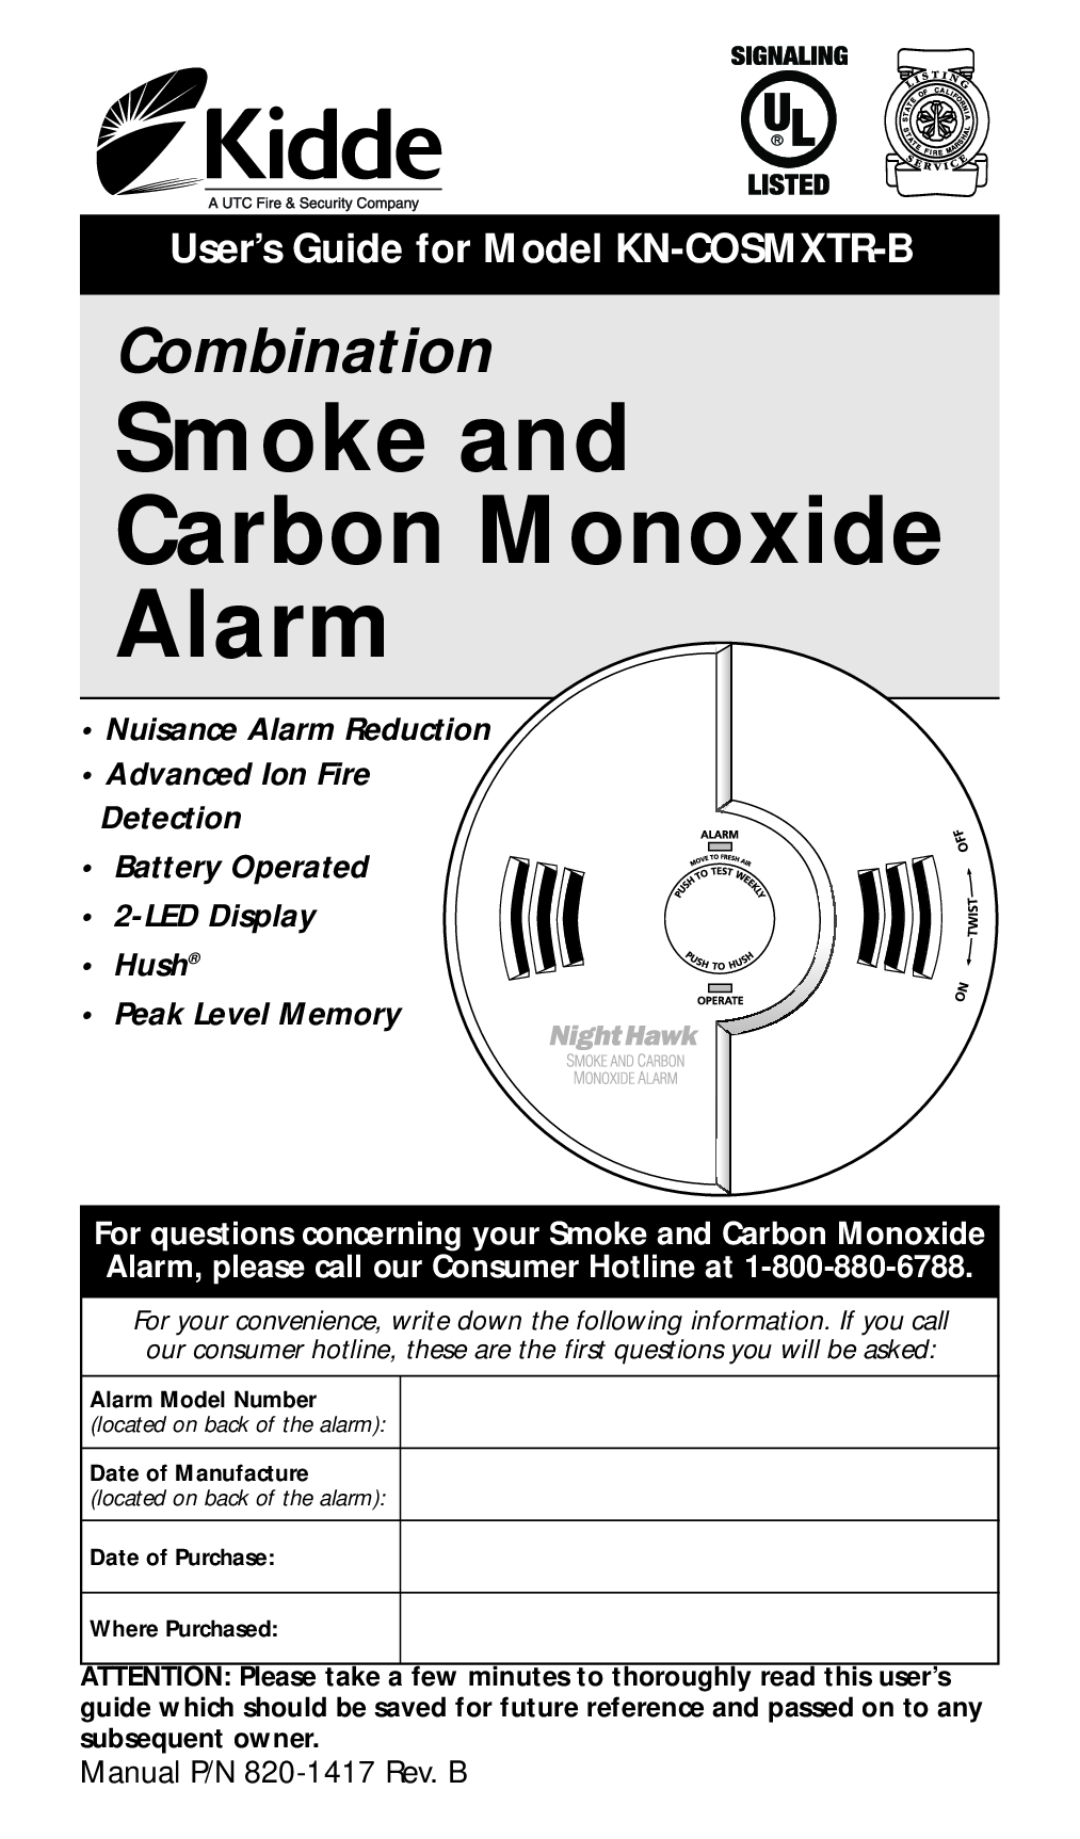 Kidde manual User’s Guide for Model KN-COSMXTR-B, Smoke and Carbon Monoxide Alarm, Combination, Where Purchased 